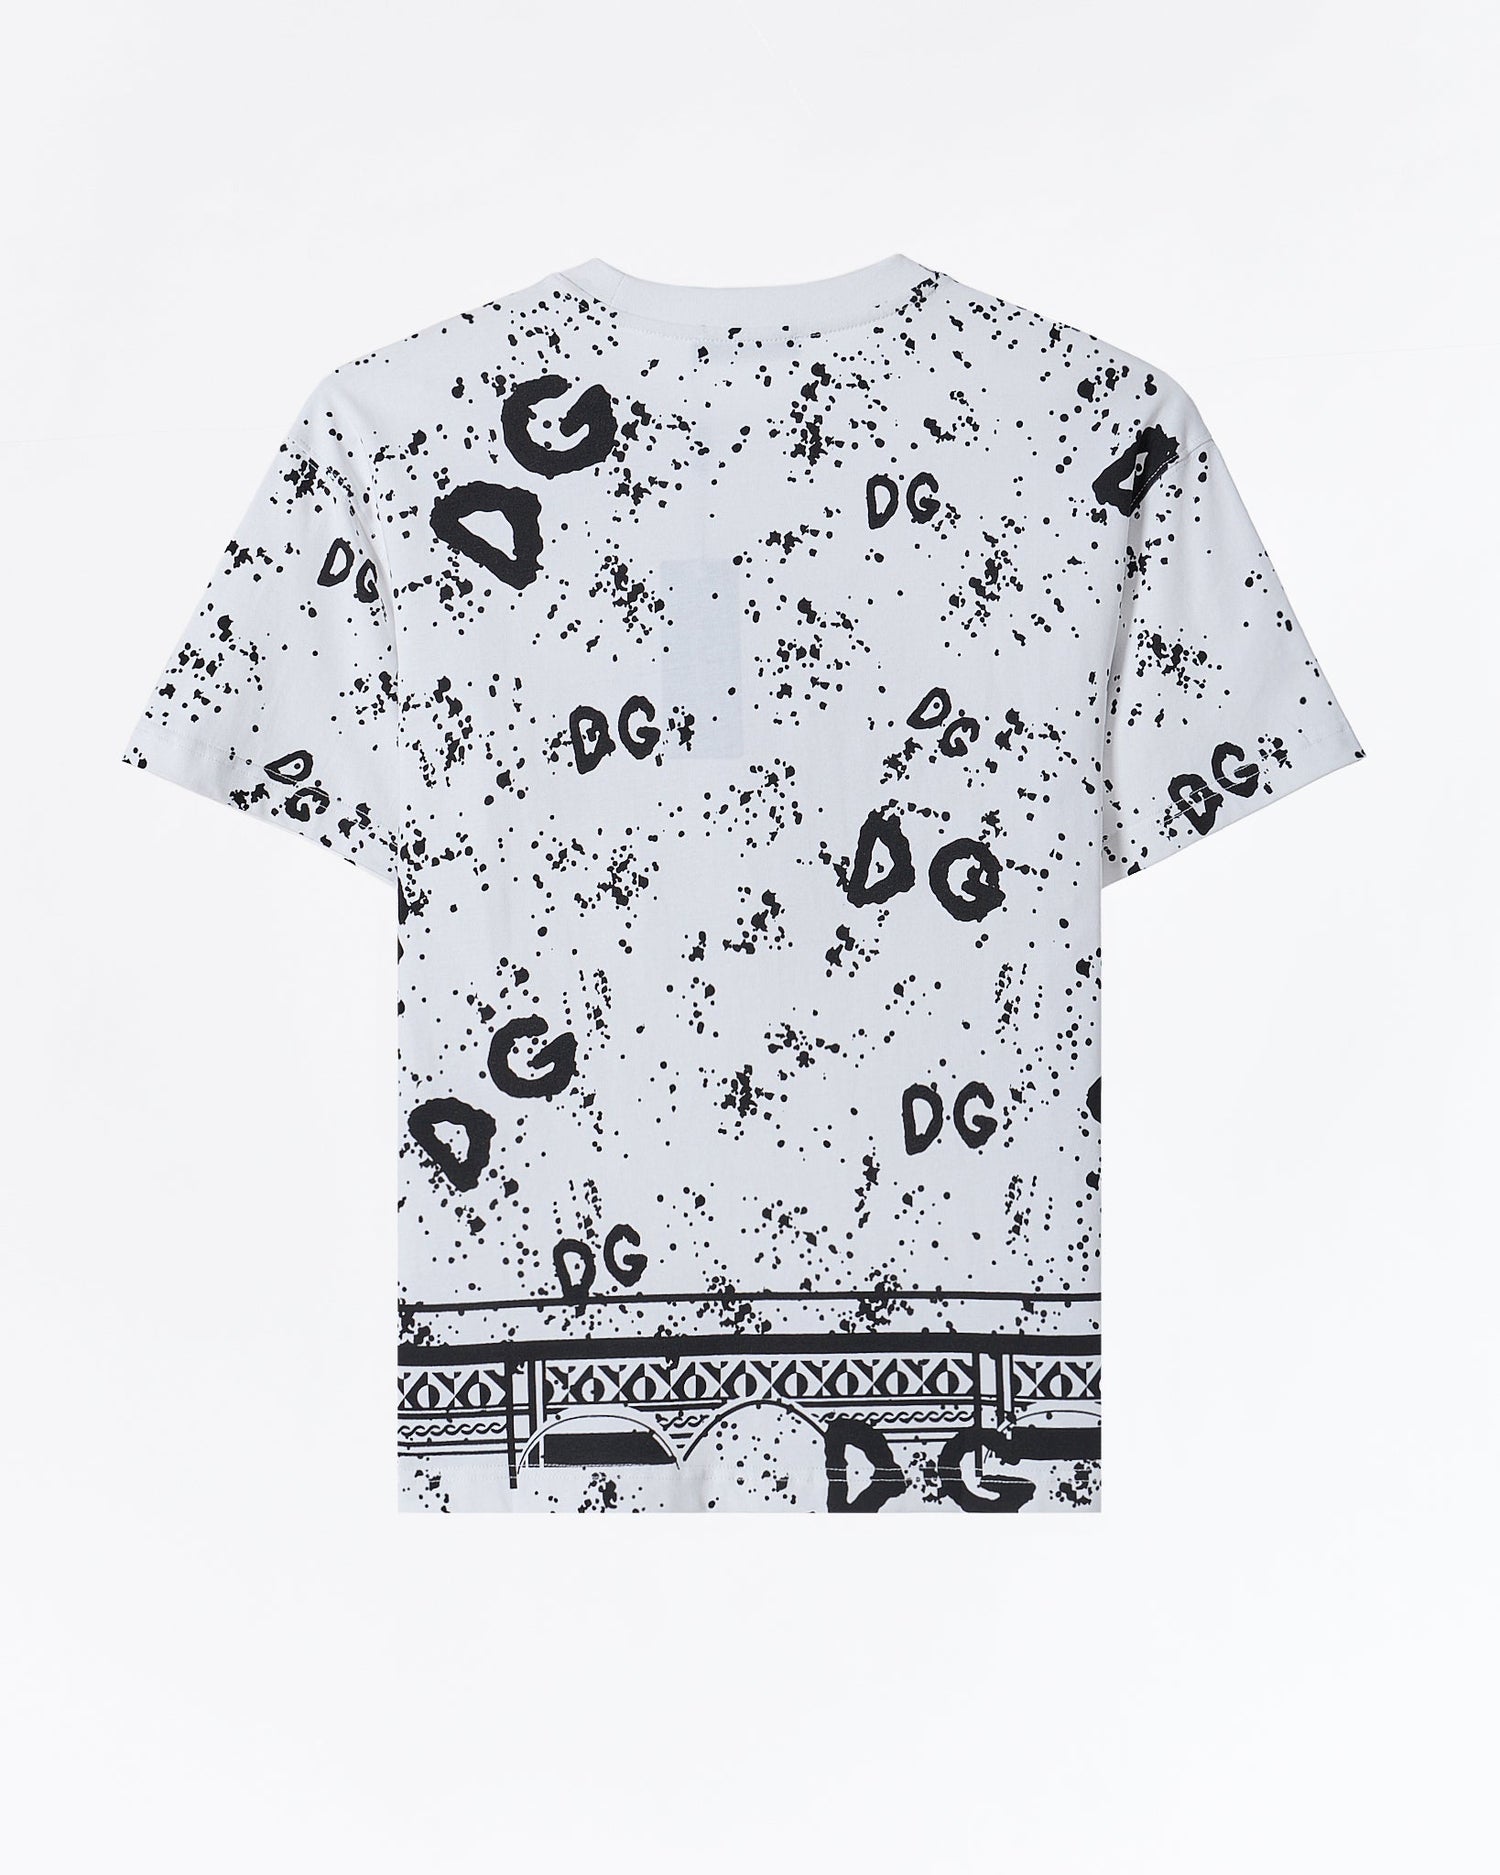 MOI OUTFIT-DG Over Printed Men T-Shirt 52.90